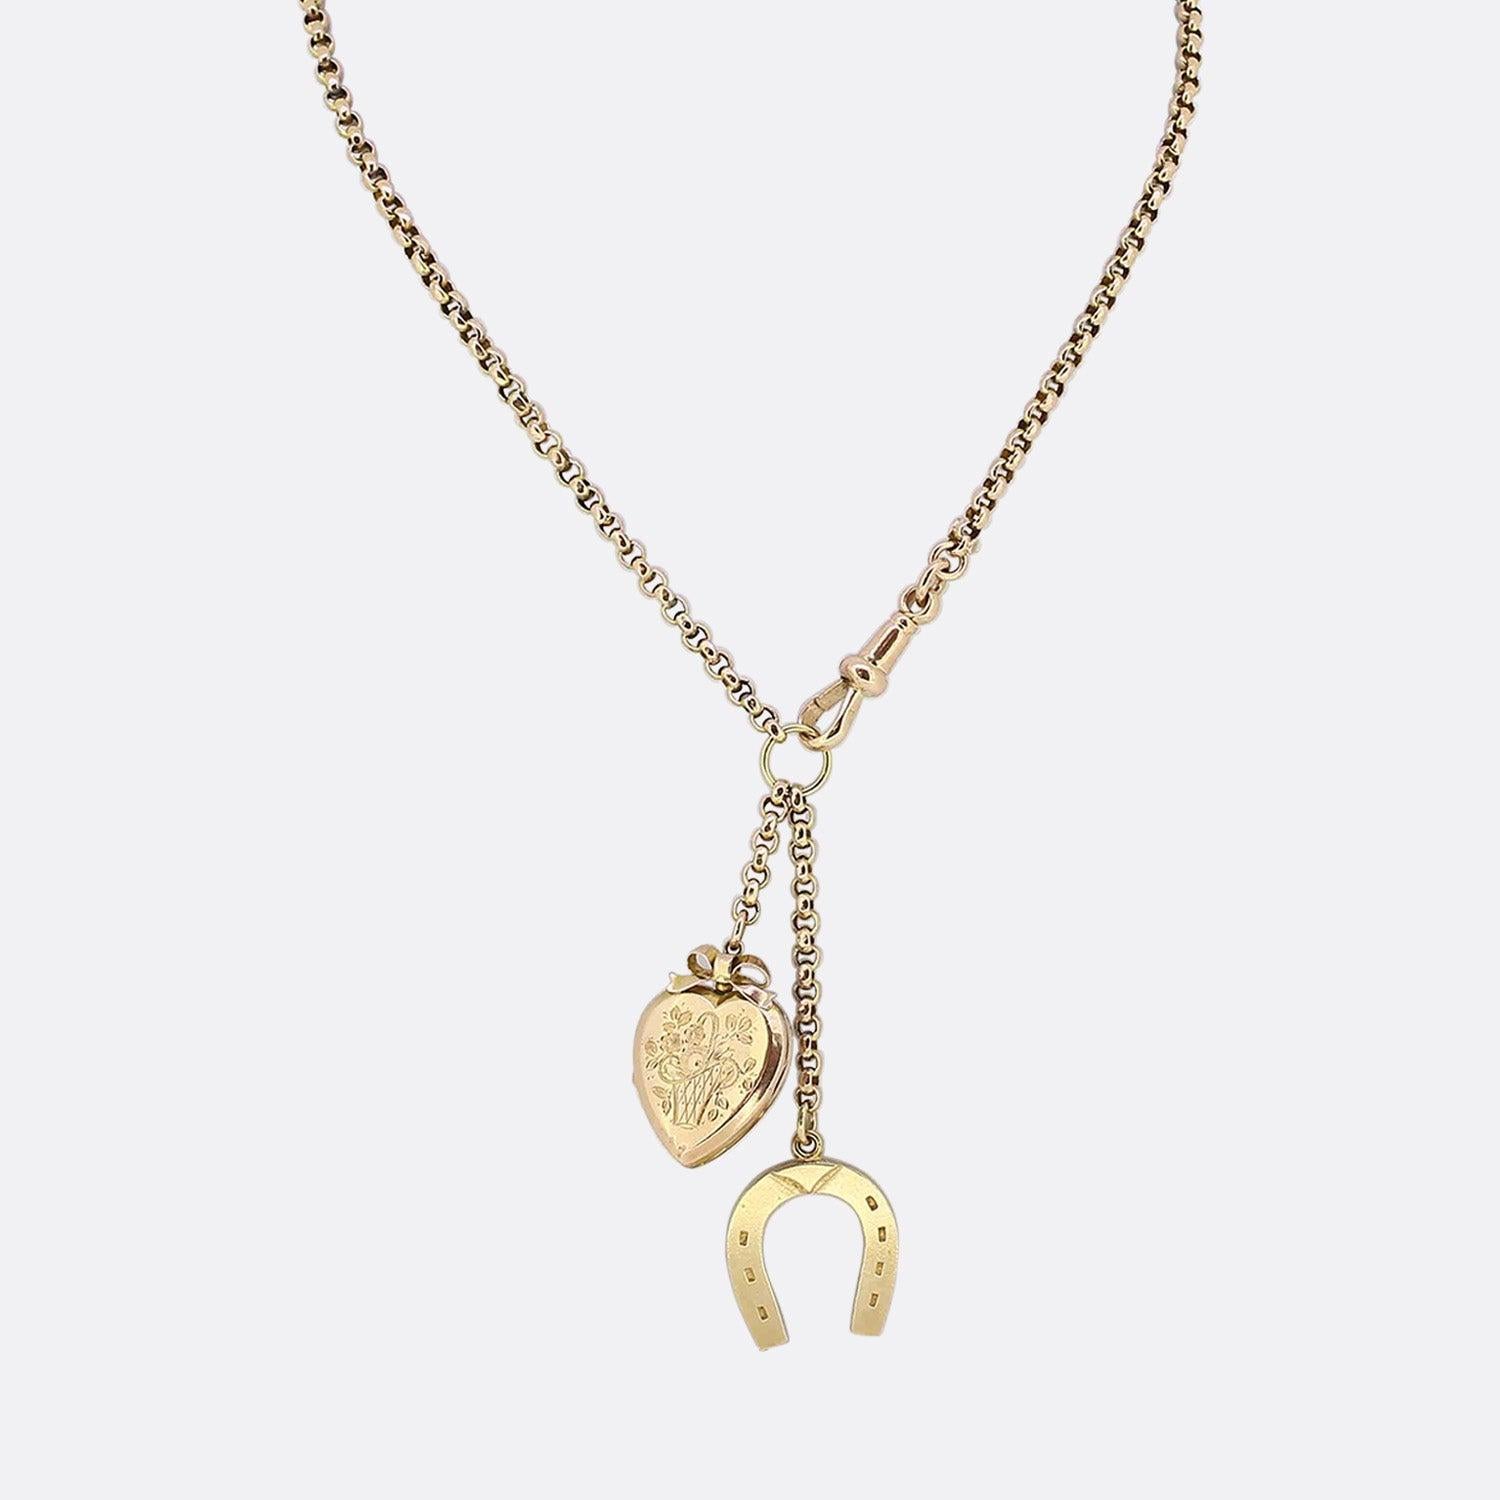 This is a vintage 9ct yellow gold belcher chain charm necklace. The necklace features two pendants; one is an engraved heart shaped locket and the other is a 9ct gold horseshoe. The necklace is securely attached by an antique swivel clasp.